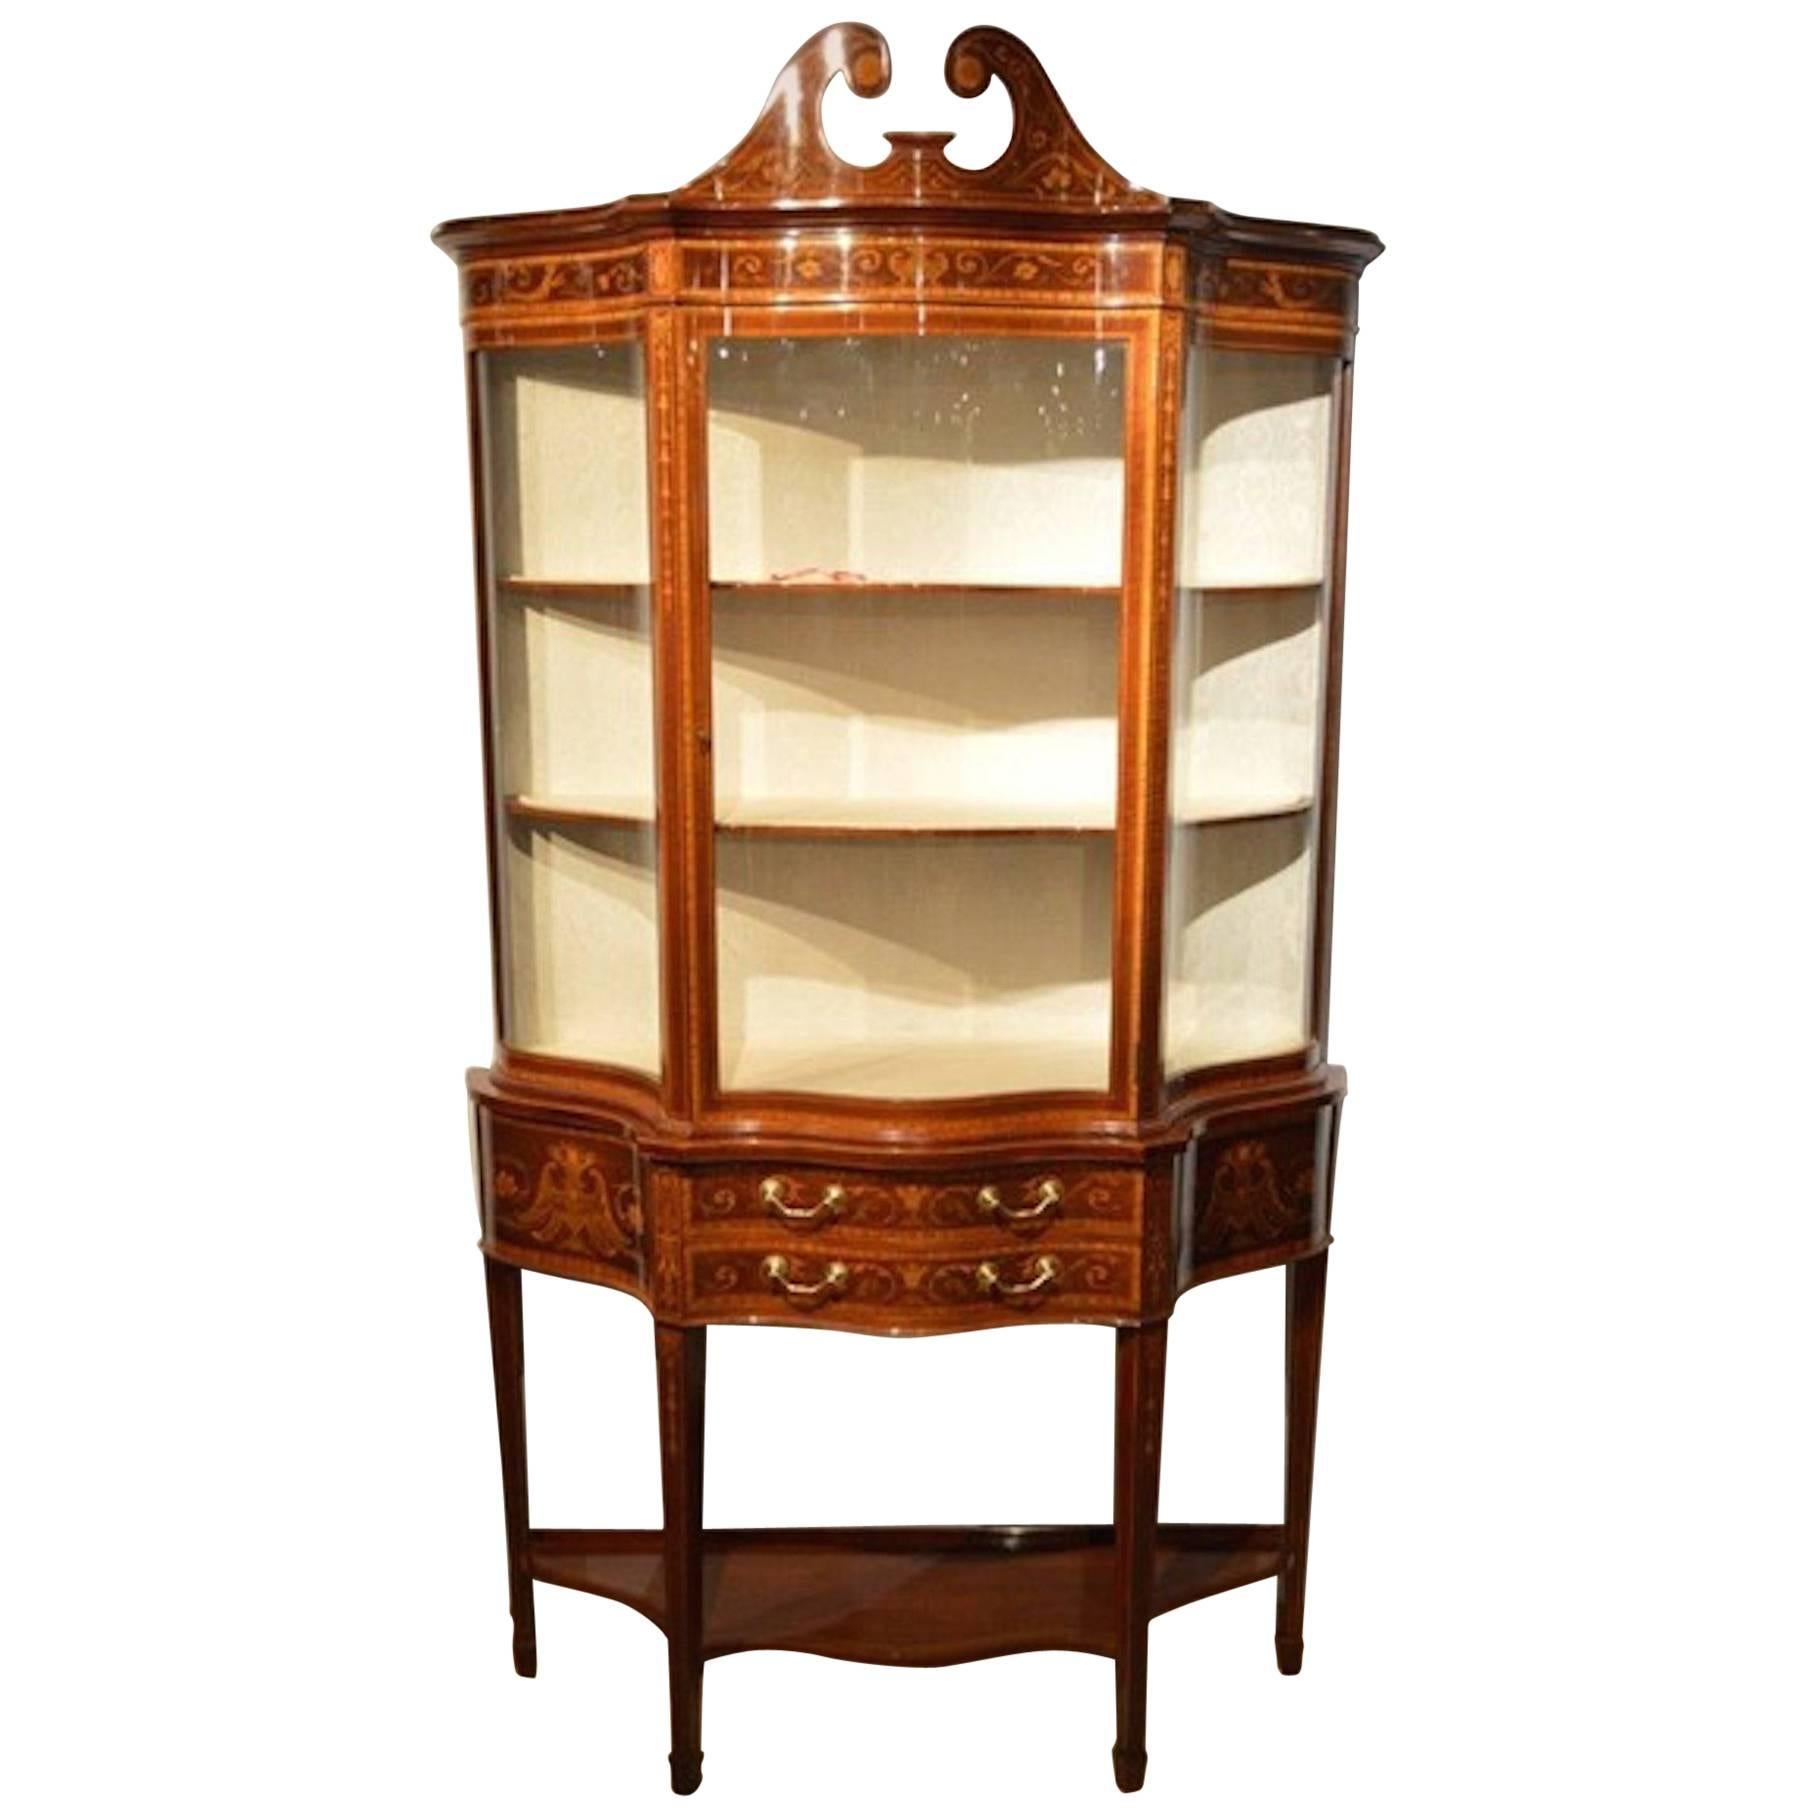 Exhibition Quality Mahogany Inlaid Serpentine Display Cabinet by Maple & Co